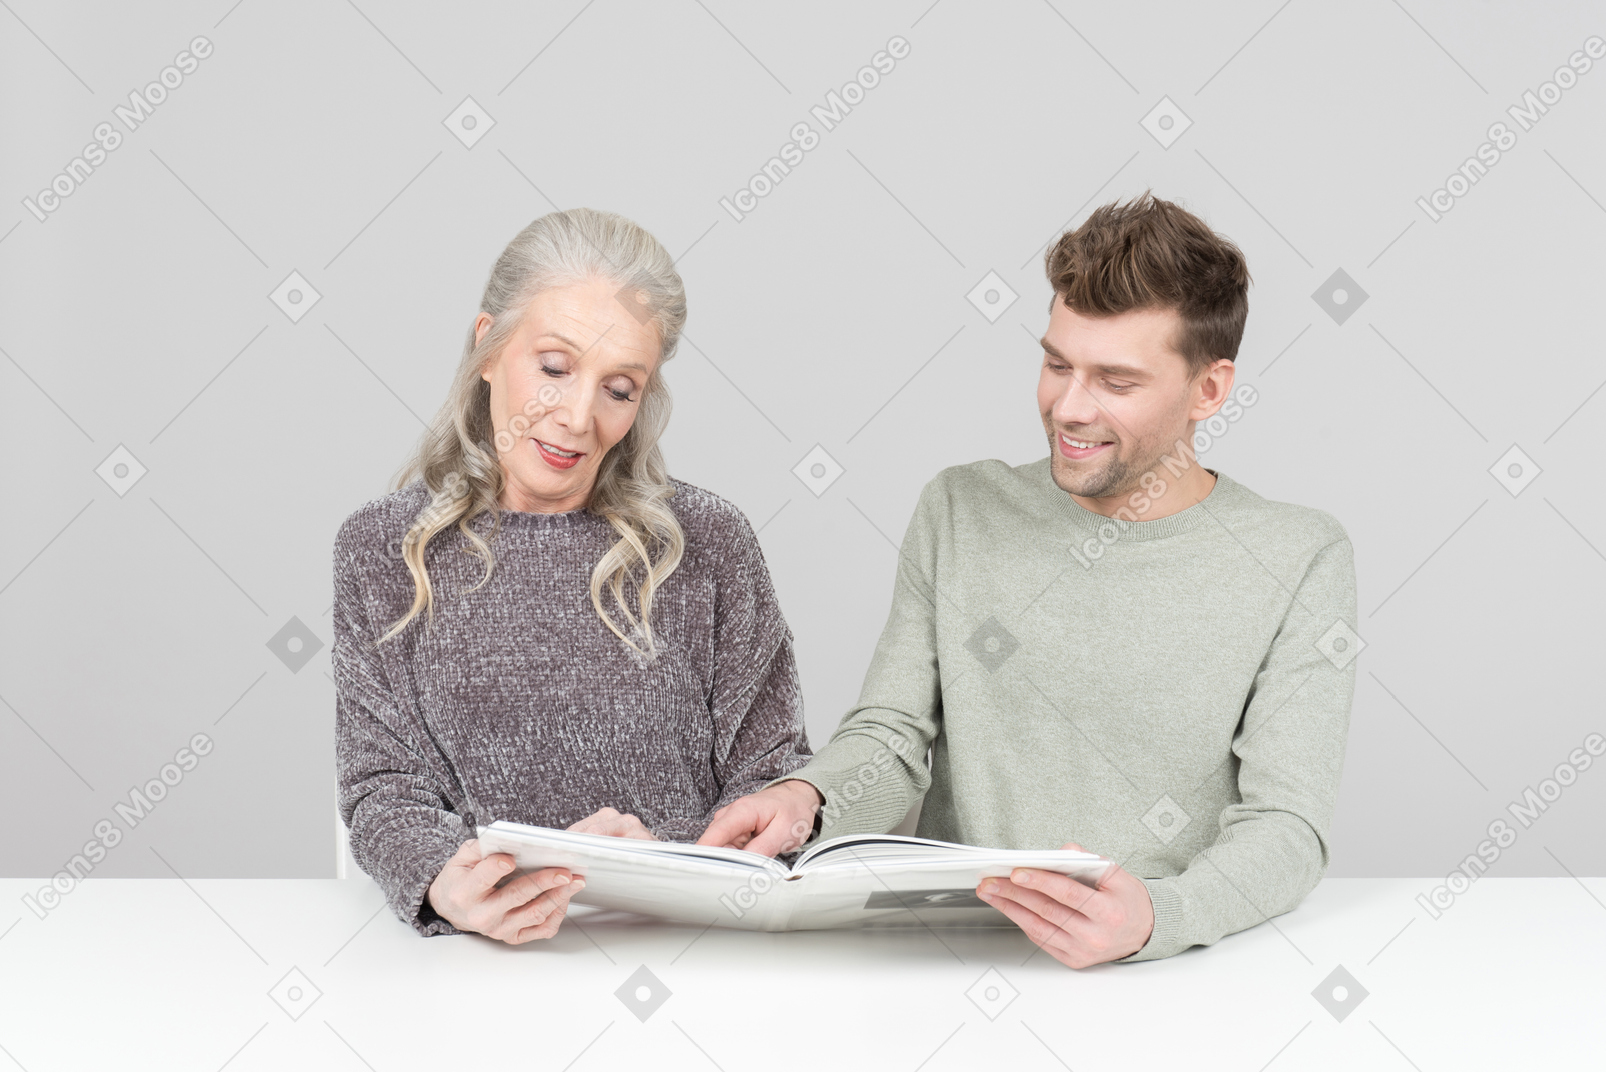 Elegant old woman and young guy going through a book together